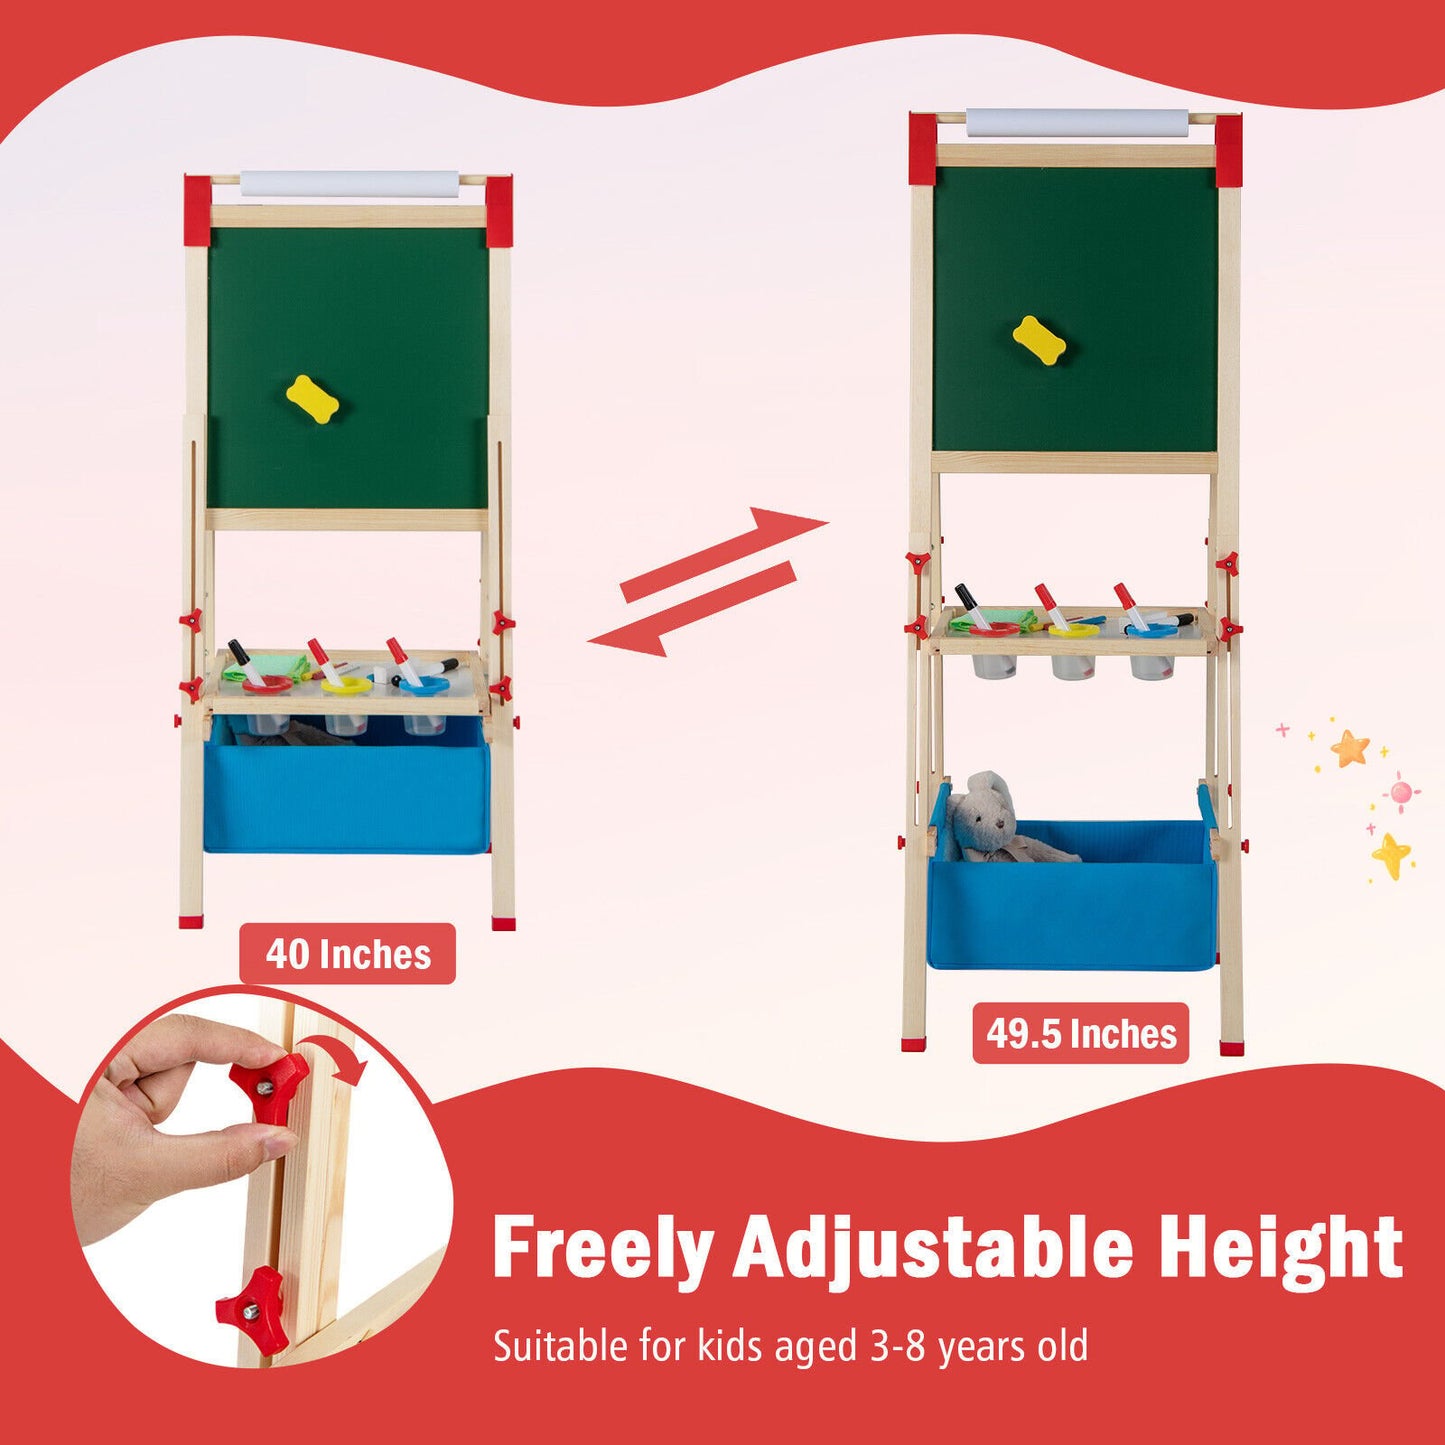 3-in-1 Double-Sided Adjustable Kid Easel for 3-8 Years Old Toddlers, Multicolor